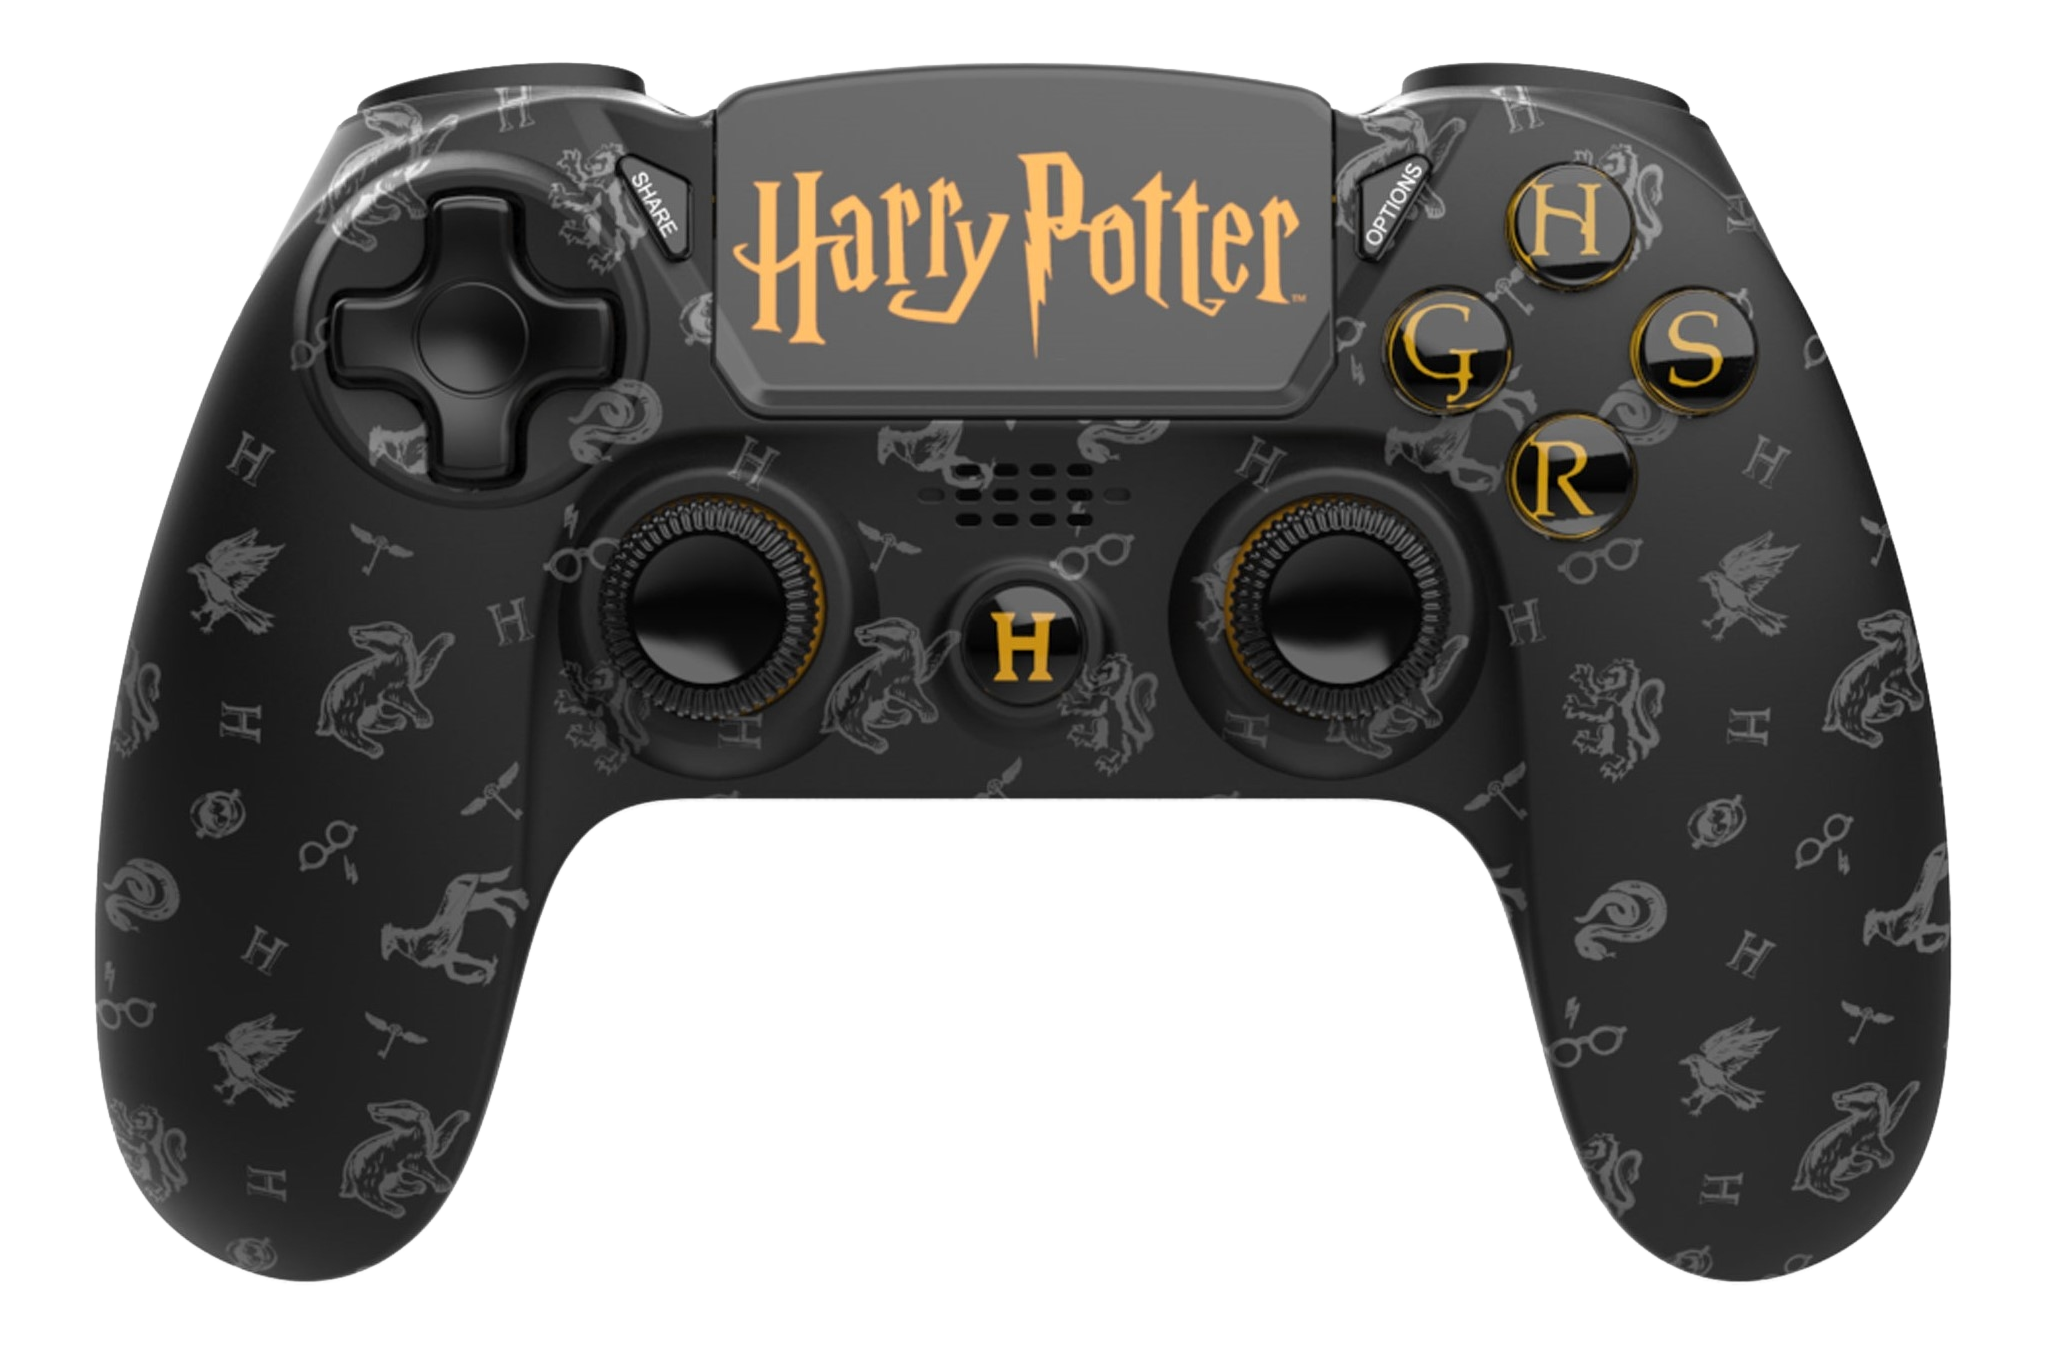 FREAKS AND GEEKS PS4 - Harry Potter - Wireless Controller (Noir/Gris/Or)